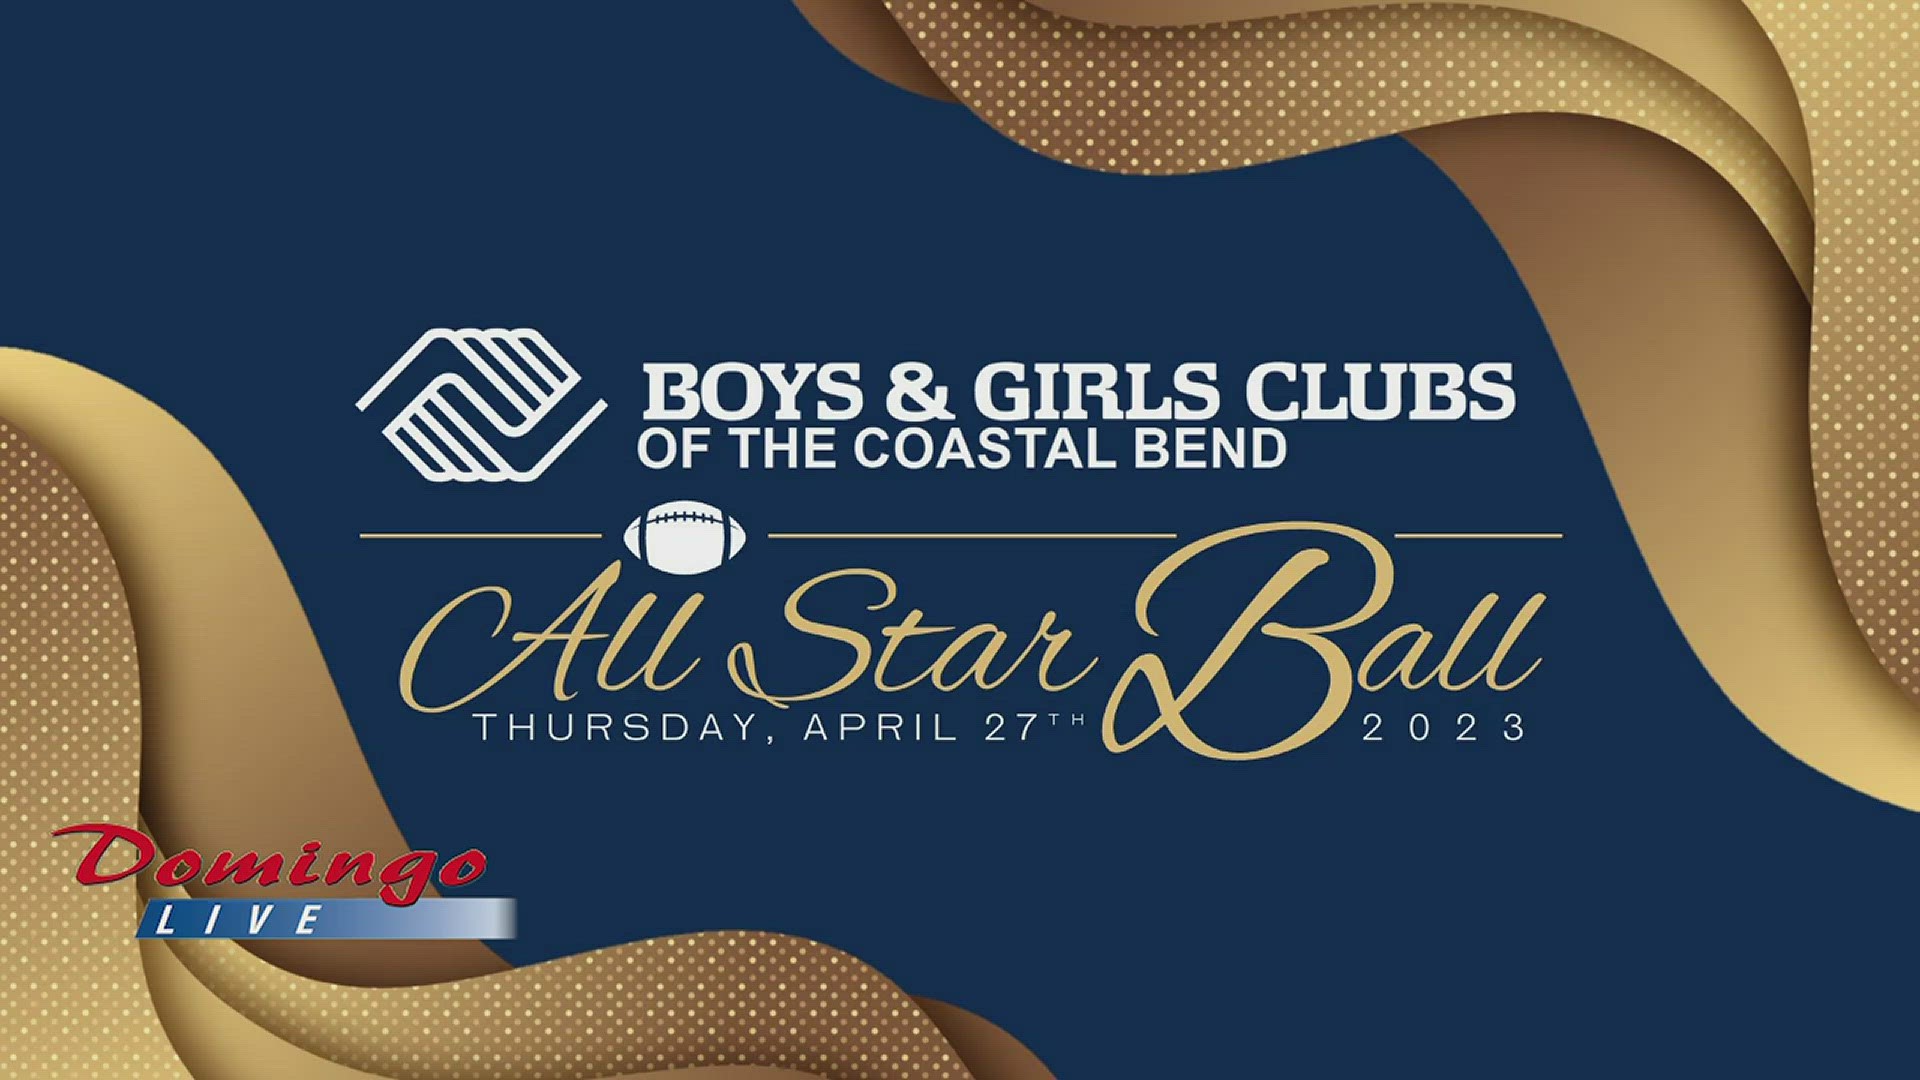 The Boys & Girls Club of the Coastal Bend's Kim Barrientos and Marisol Ramirez of joined us live to discuss the All Star Ball featuring Cowboys QB Cooper Rush.